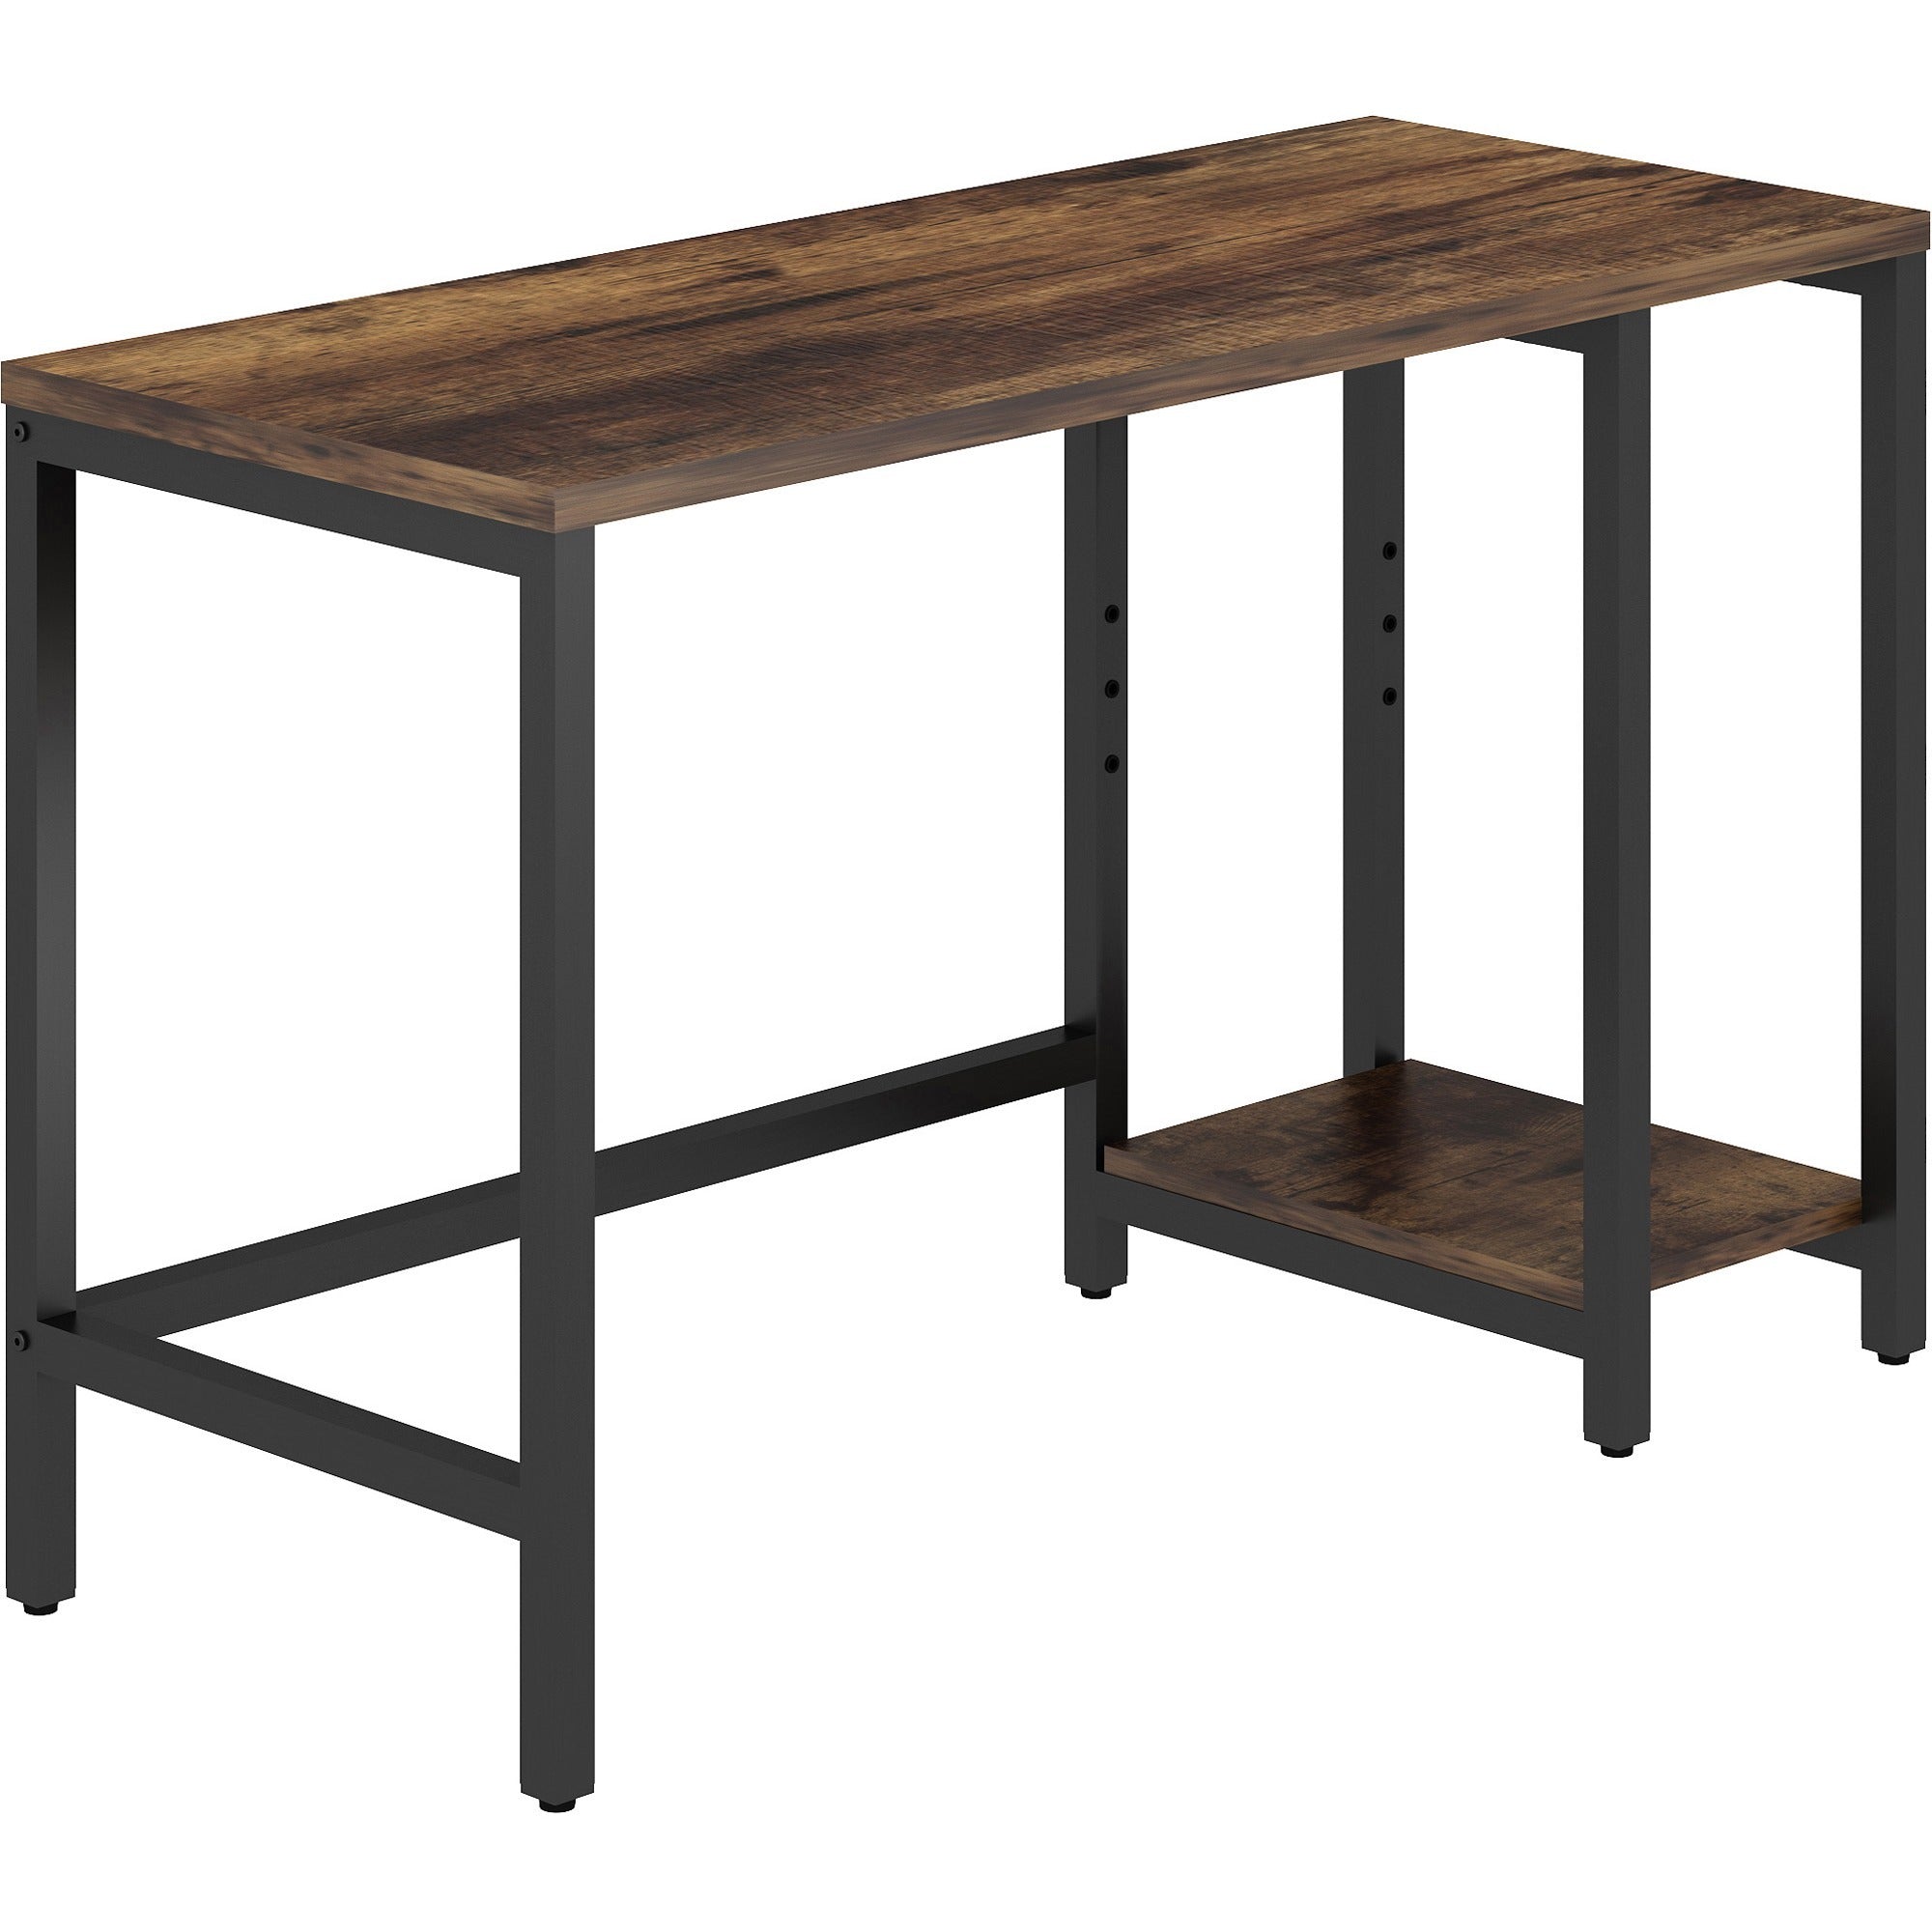 nusparc-metal-frame-desk-for-table-topvintage-oak-black-top-contemporary-style-220-lb-capacity-x-4720-table-top-width-x-1970-table-top-depth-x-1-table-top-thickness-2950-height-assembly-required-high-pressure-laminate-hpl-top_nprdk101nrrk - 1